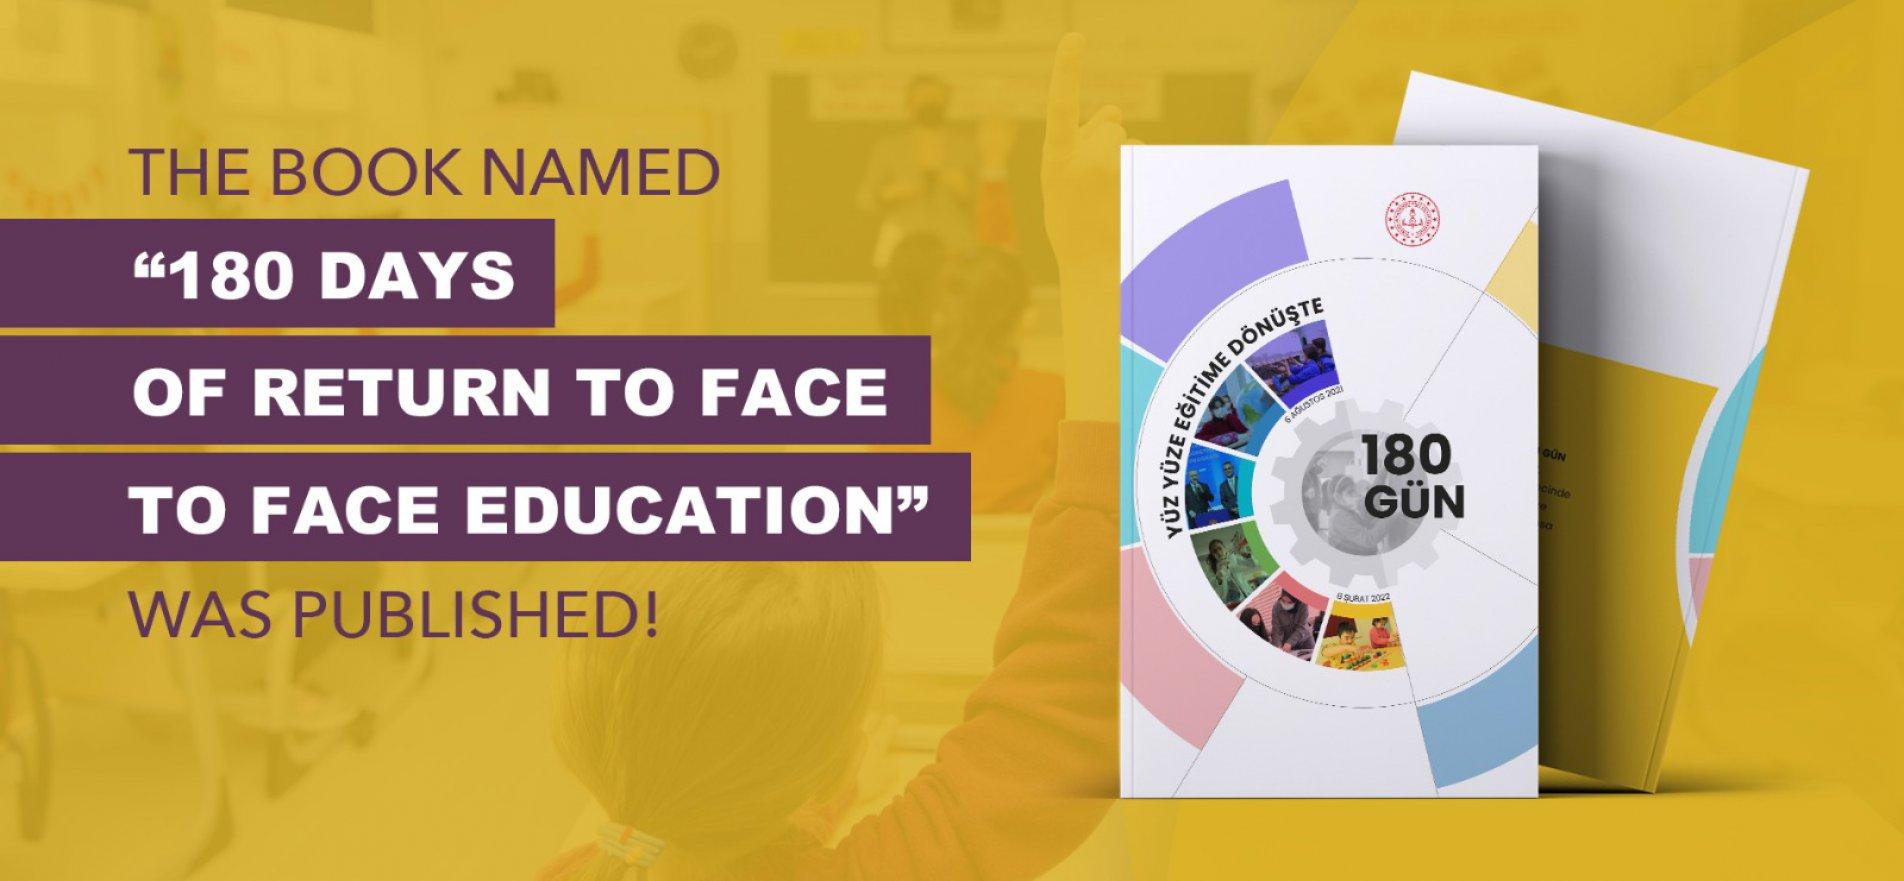 PROJECTS CARRIED OUT DURING TRANSITION TO FACE-TO-FACE EDUCATION PUBLISHED IN A BOOK NAMED 